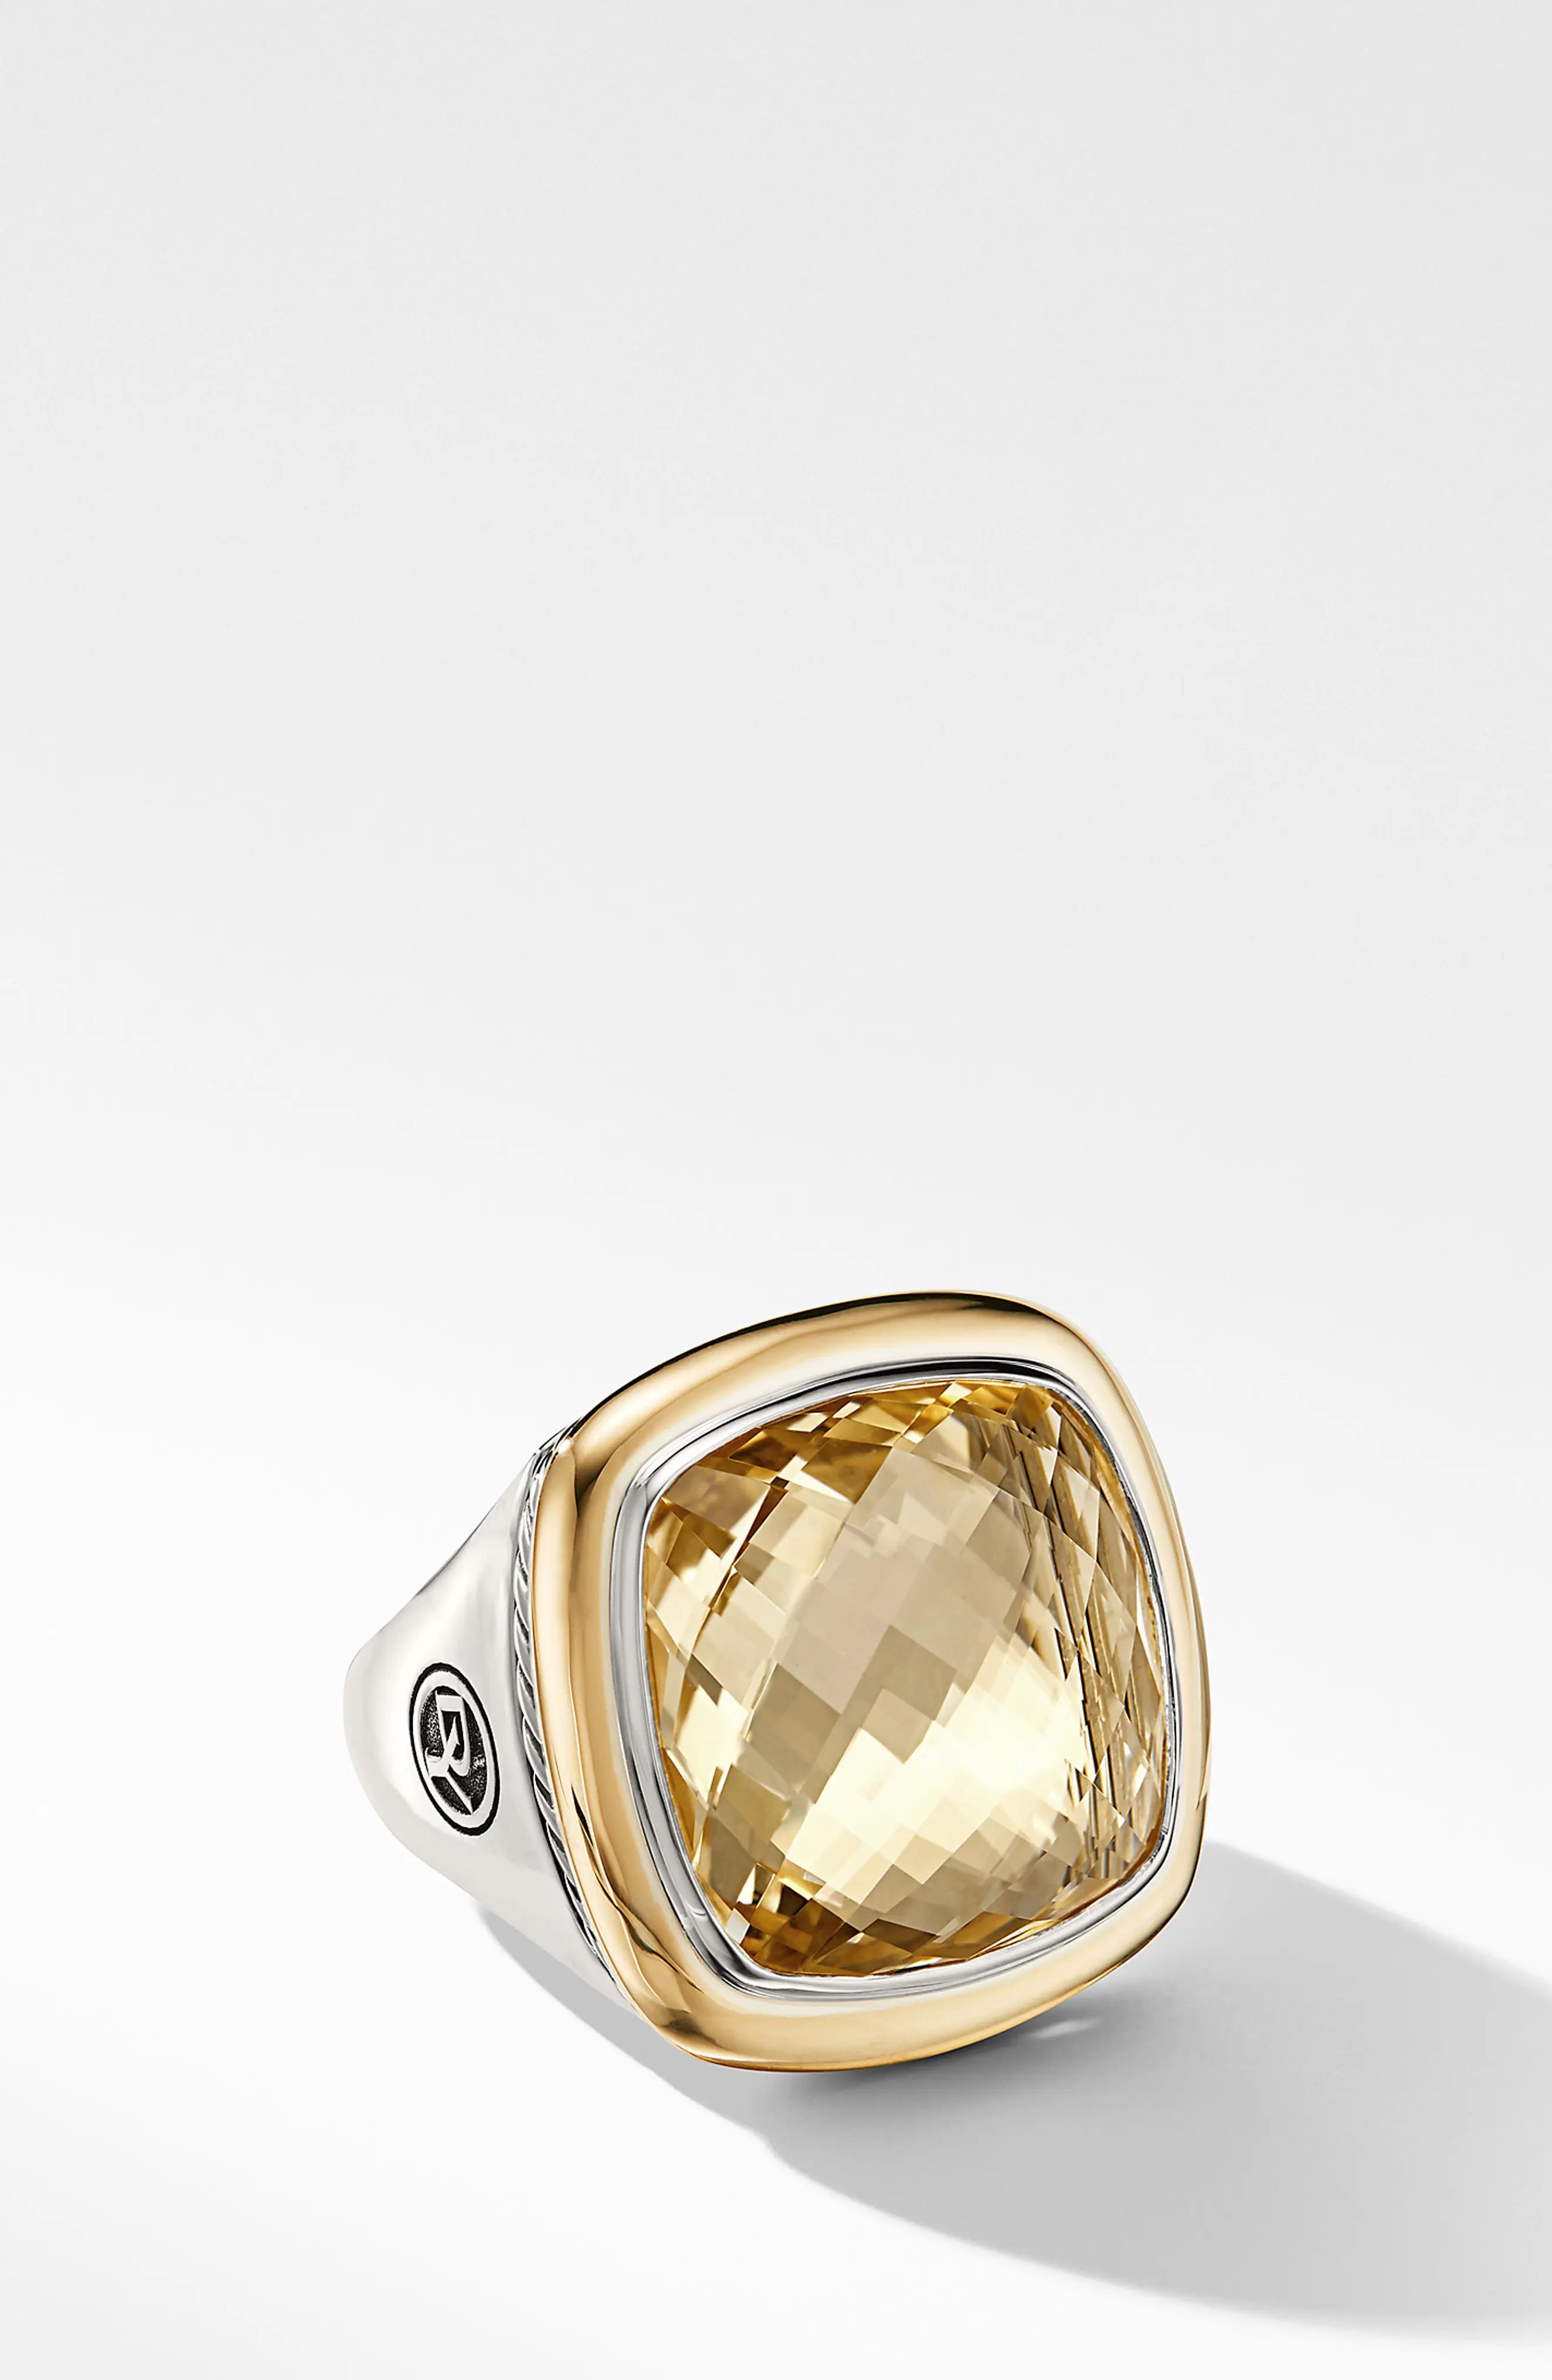 David Yurman Albion® Statement Ring with 18K Gold and Champagne Citrine or Reconstituted Turquoise | Nordstrom